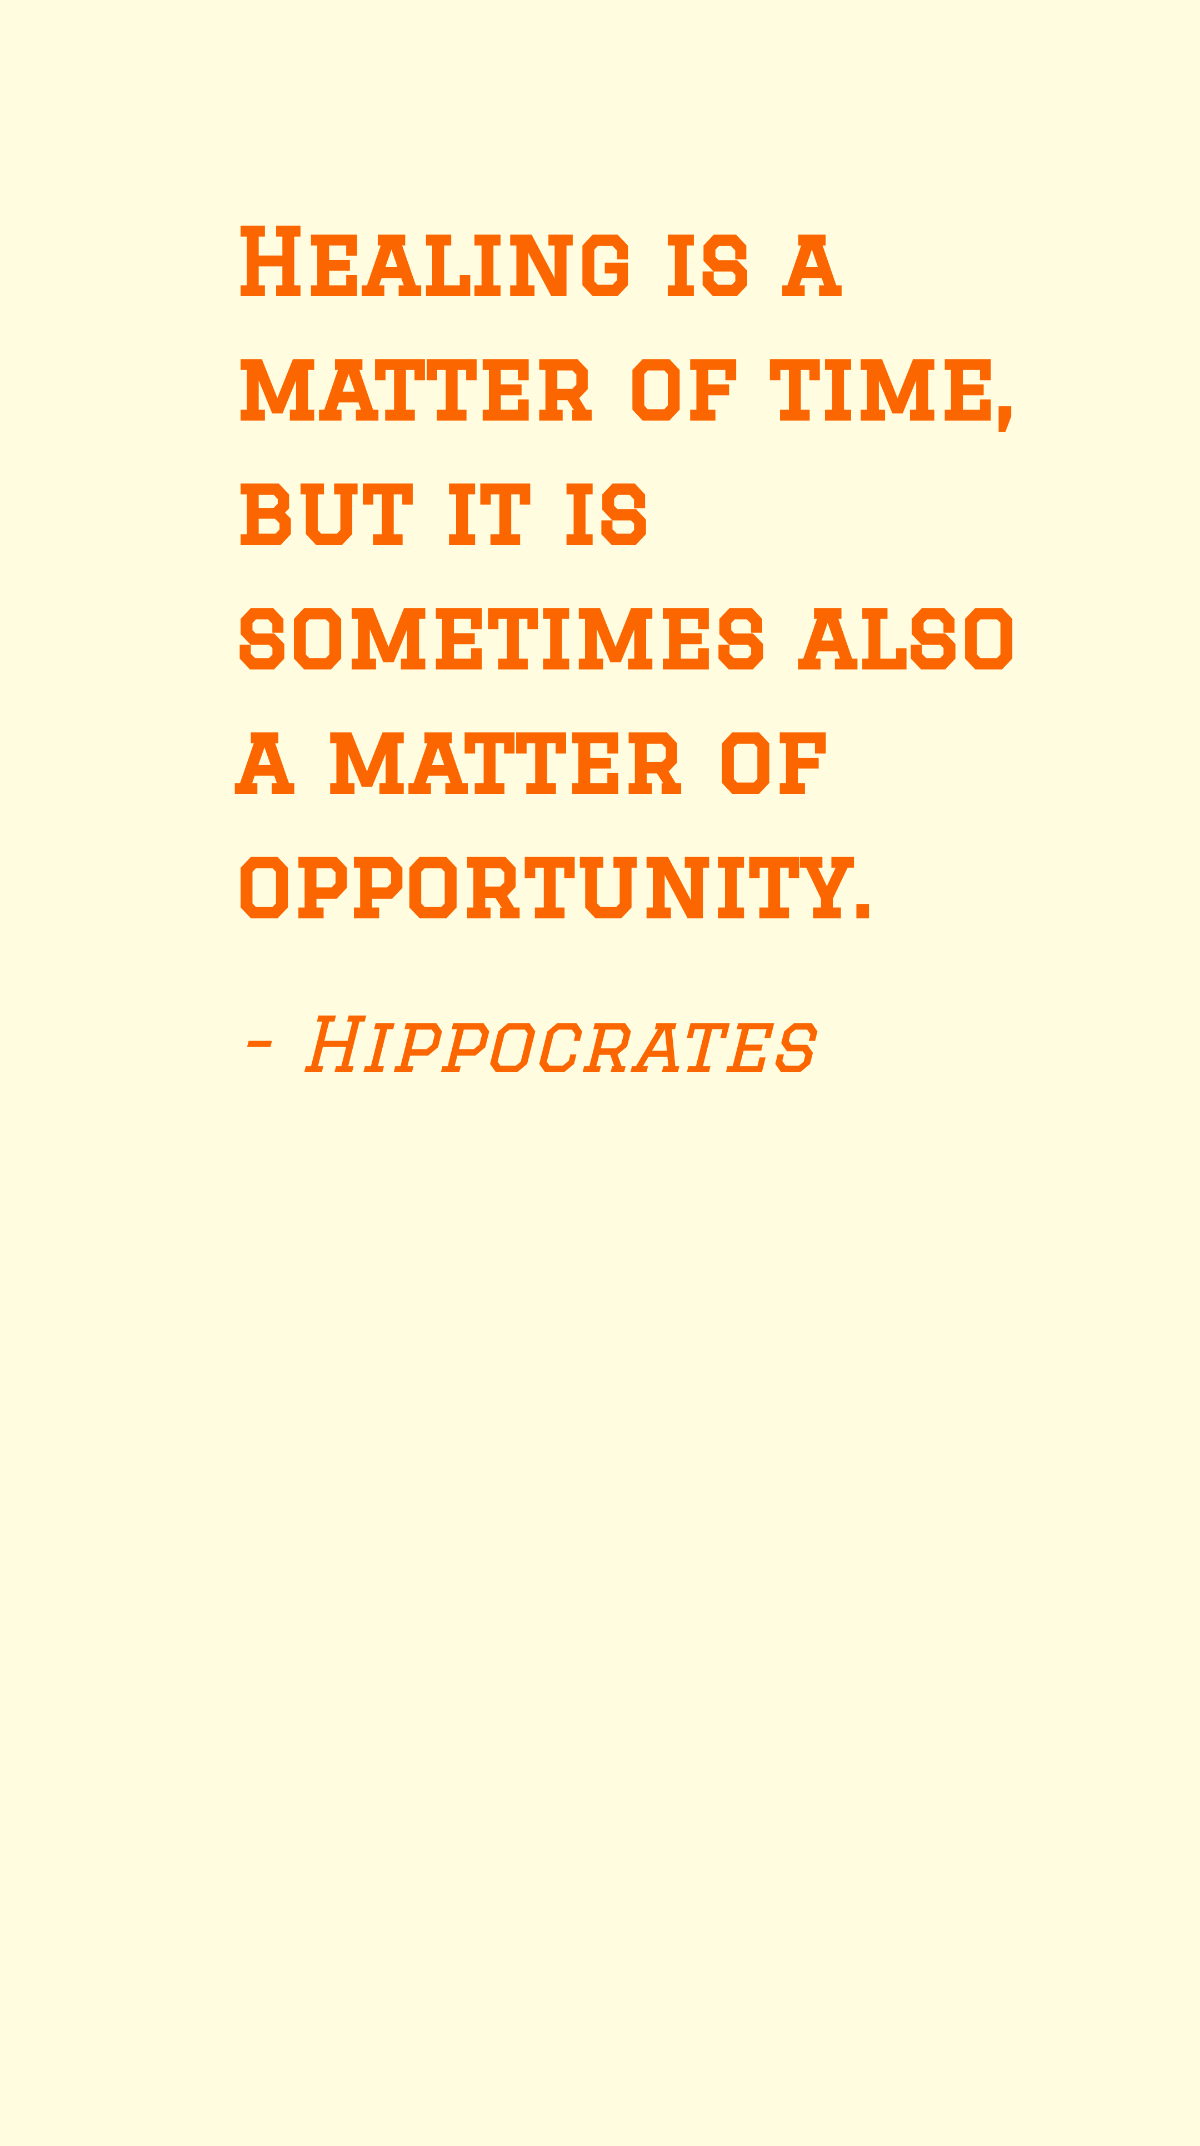 Hippocrates - Healing is a matter of time, but it is sometimes also a matter of opportunity. Template